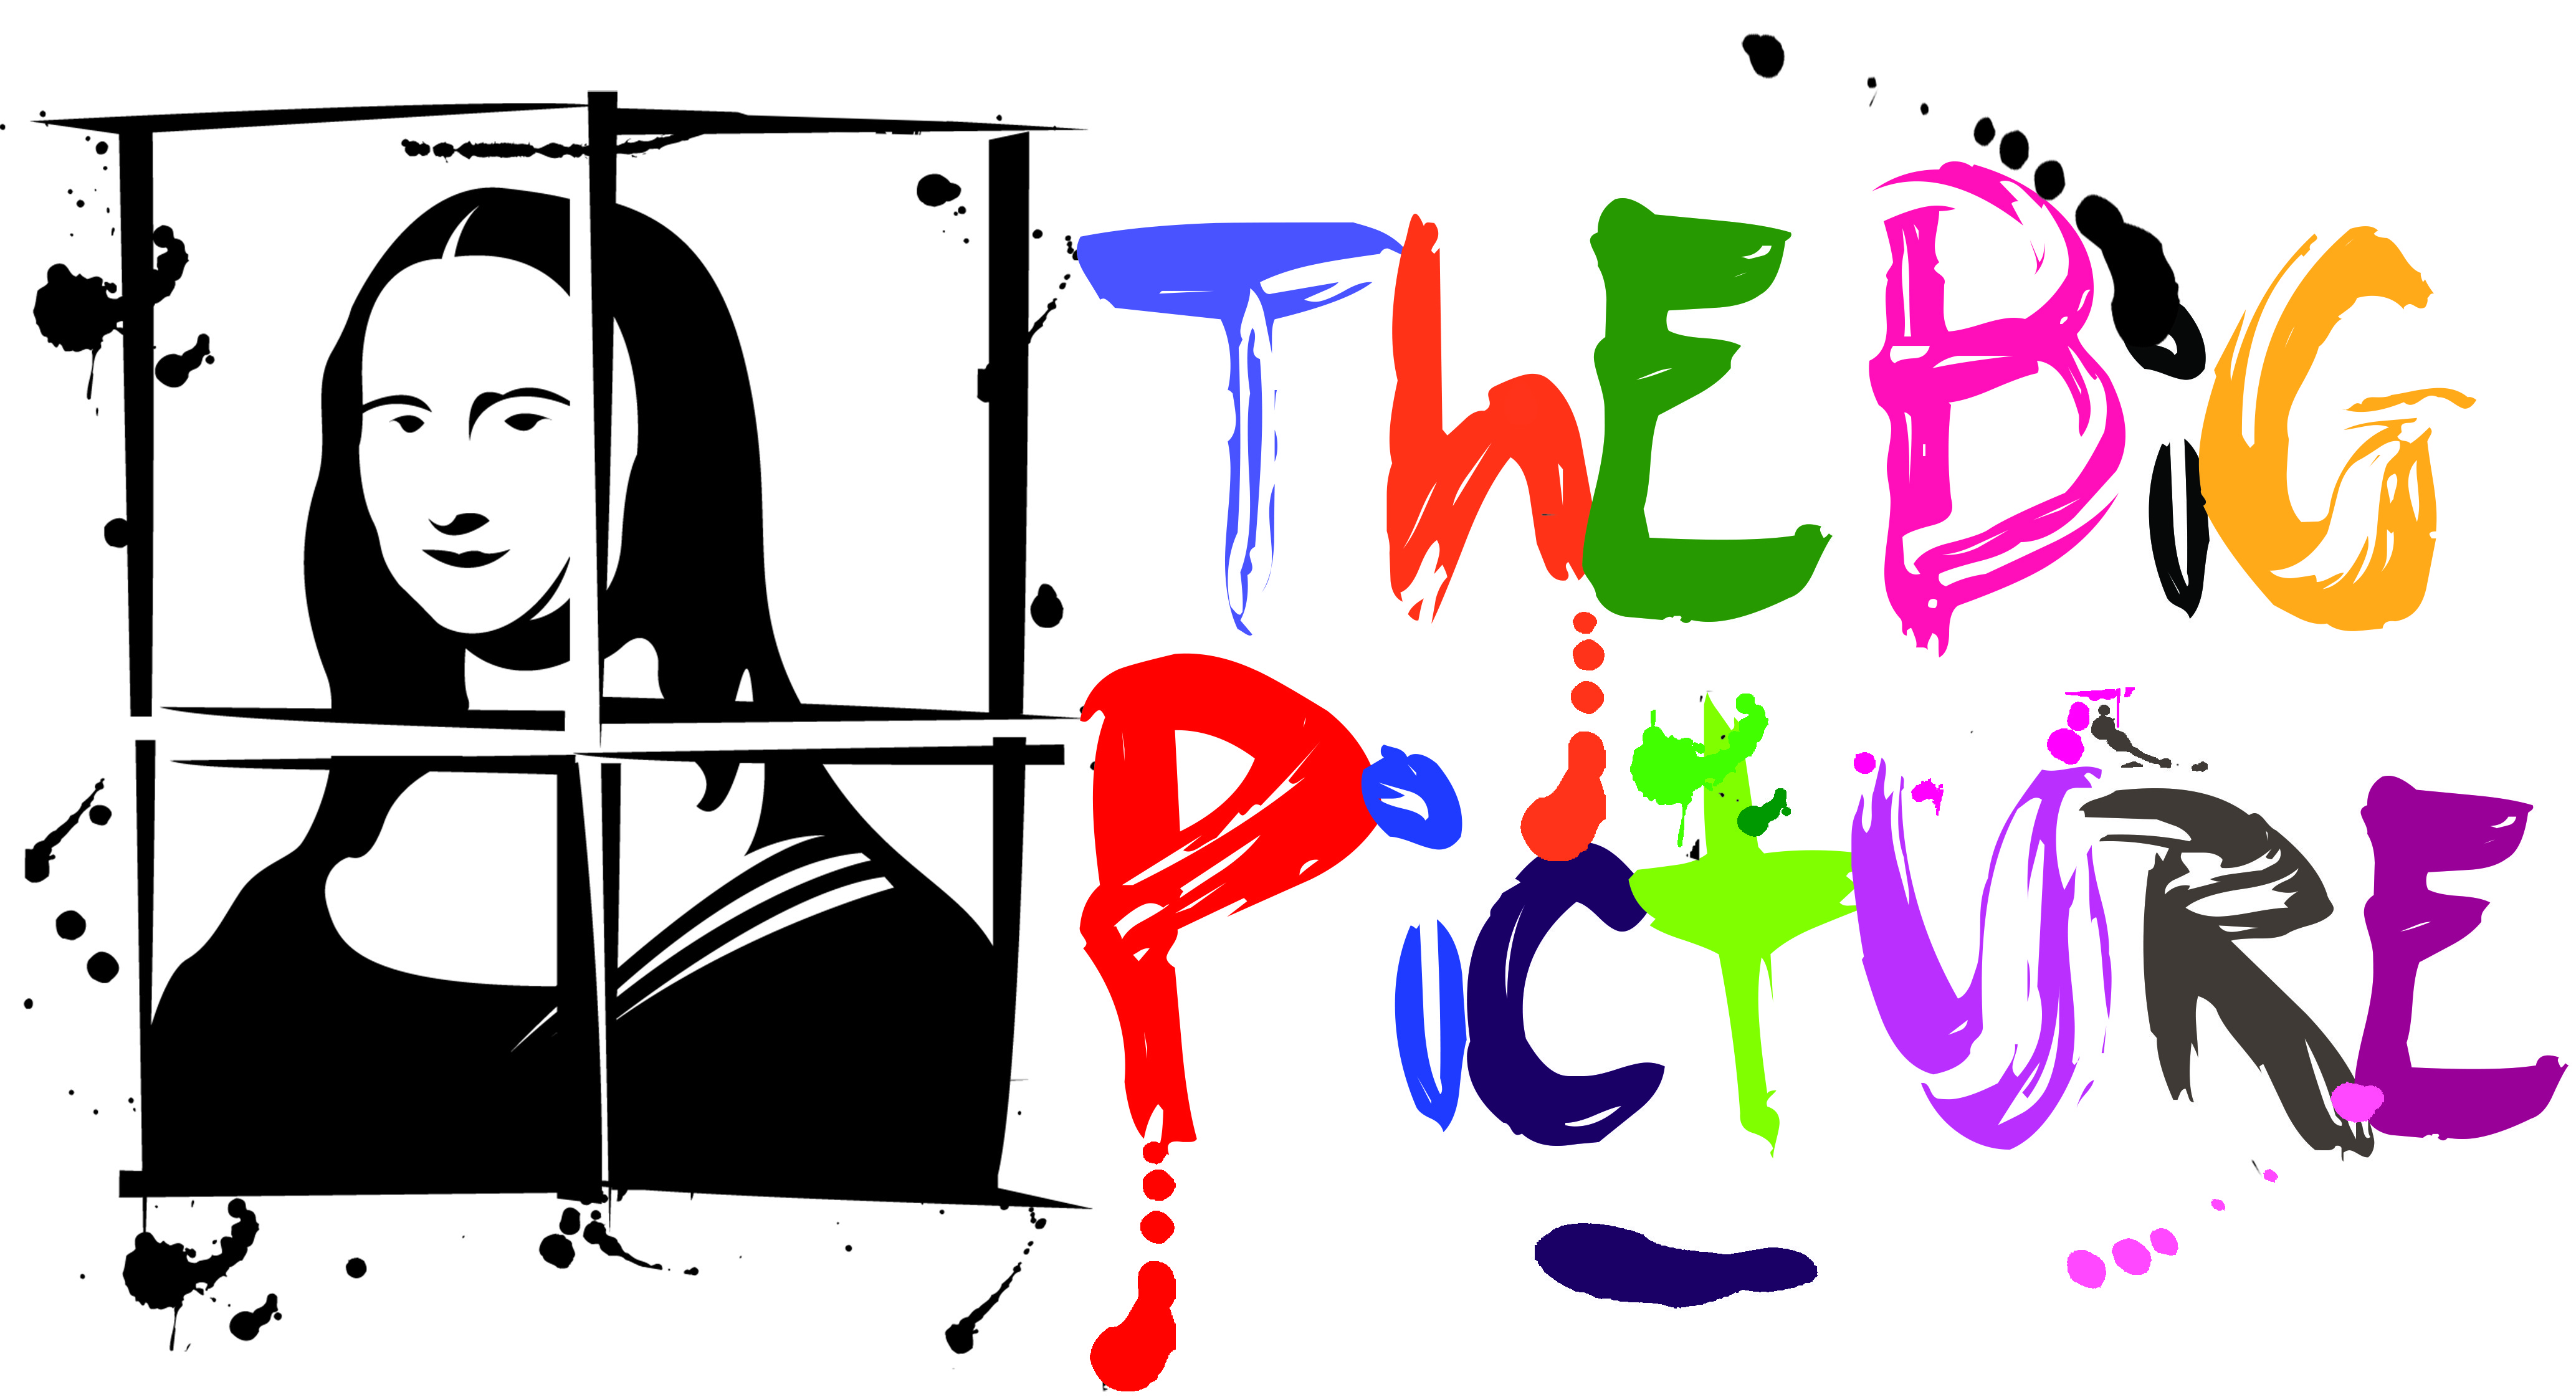 the big picture logo